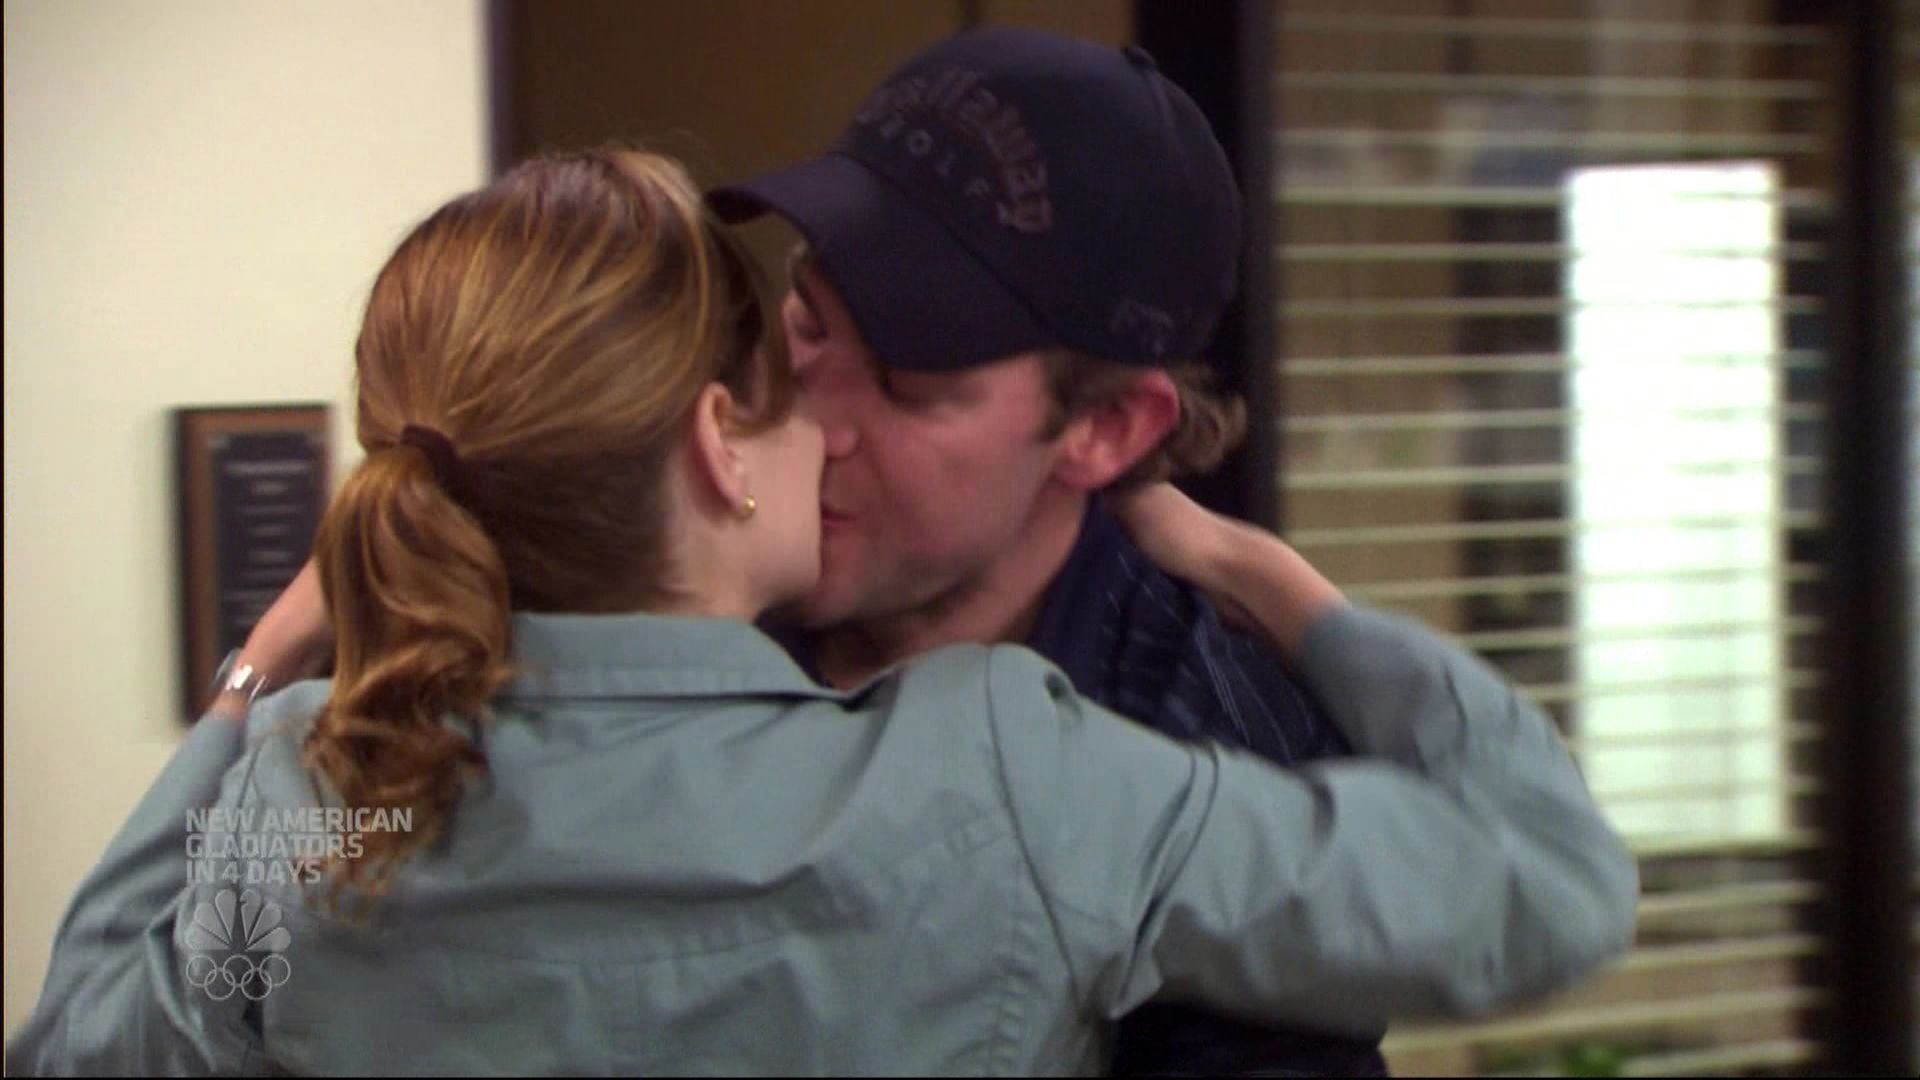 Jim Pam The Office Tv Couples Image